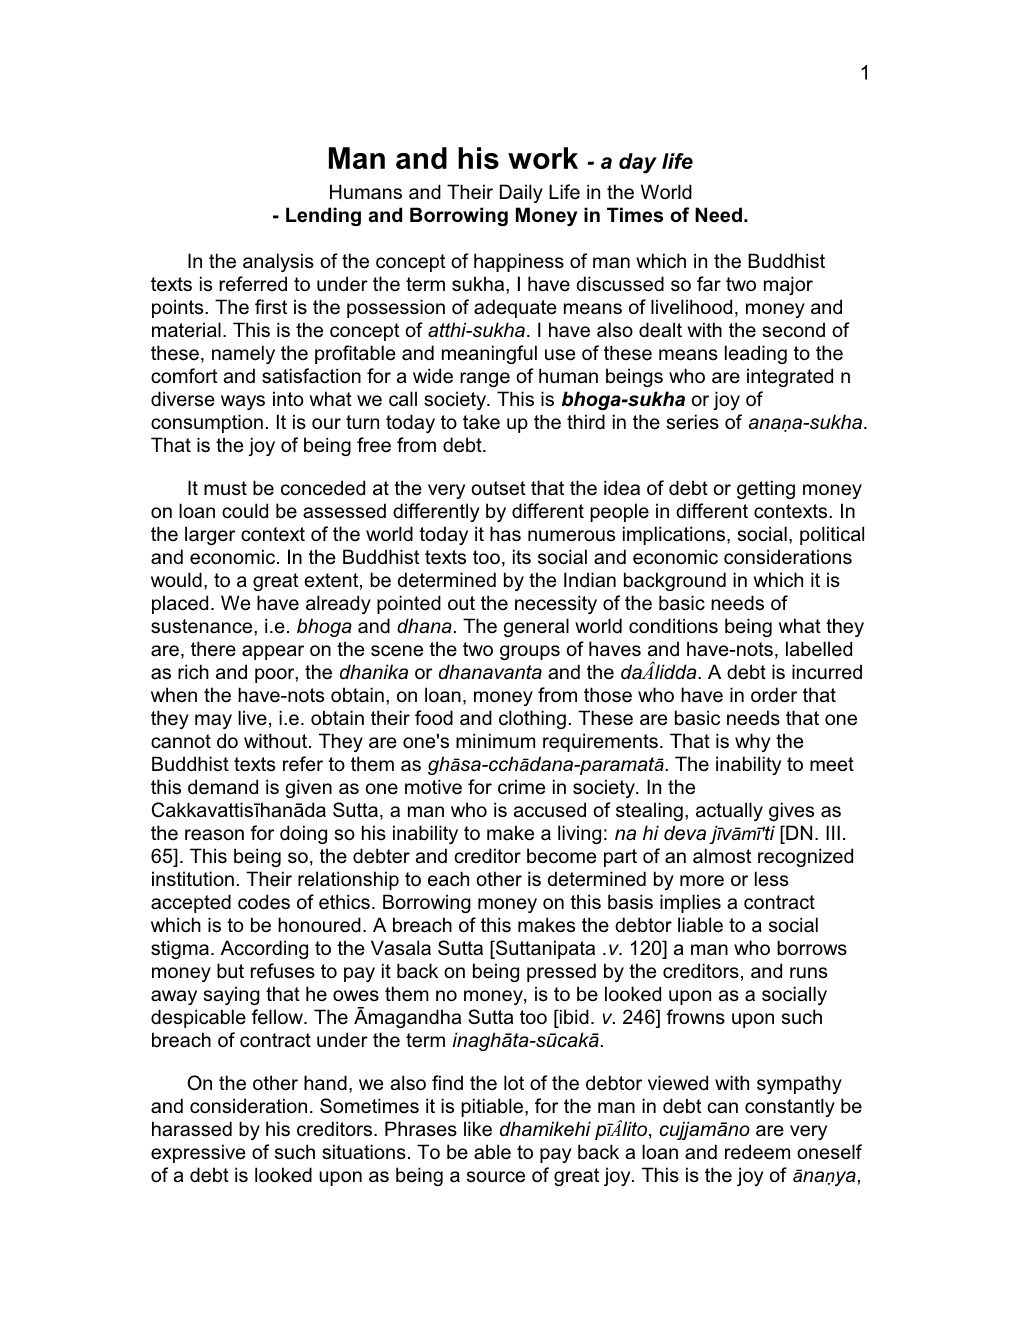 Man and His Work - a Day Life, Humans and Their Daily Life in the World -Lending and Borrowing